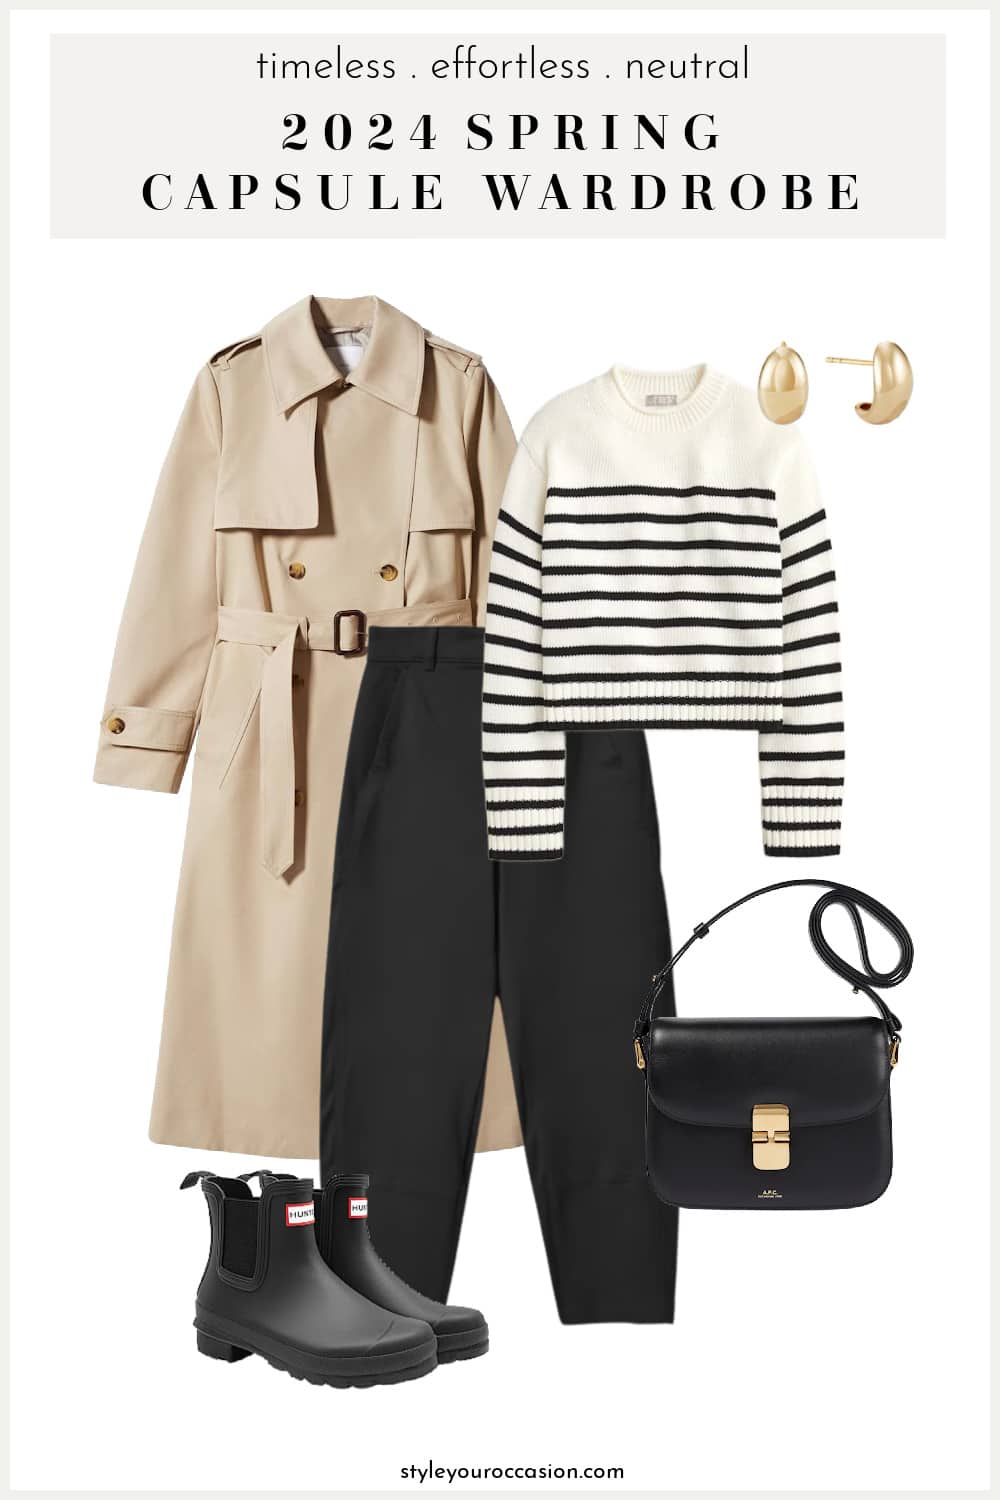 outfit image with a trench coat, striped knit sweater, black pants, and rain boots for a spring capsule wardrobe